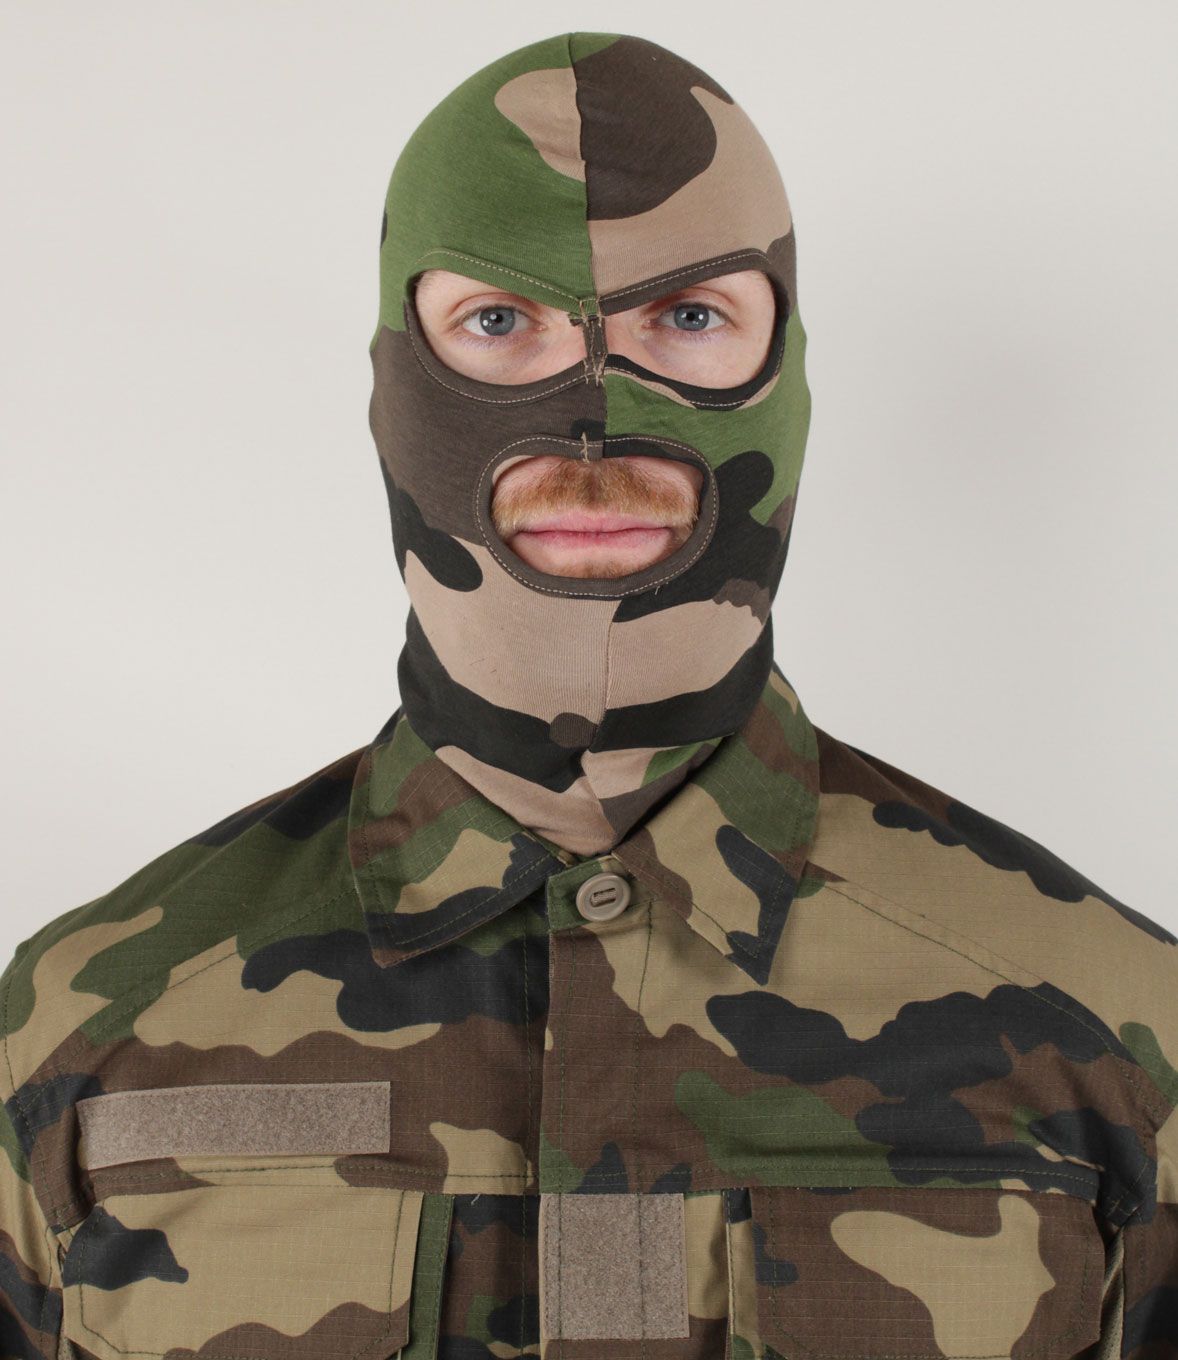 Cagoule Militaire Camouflage